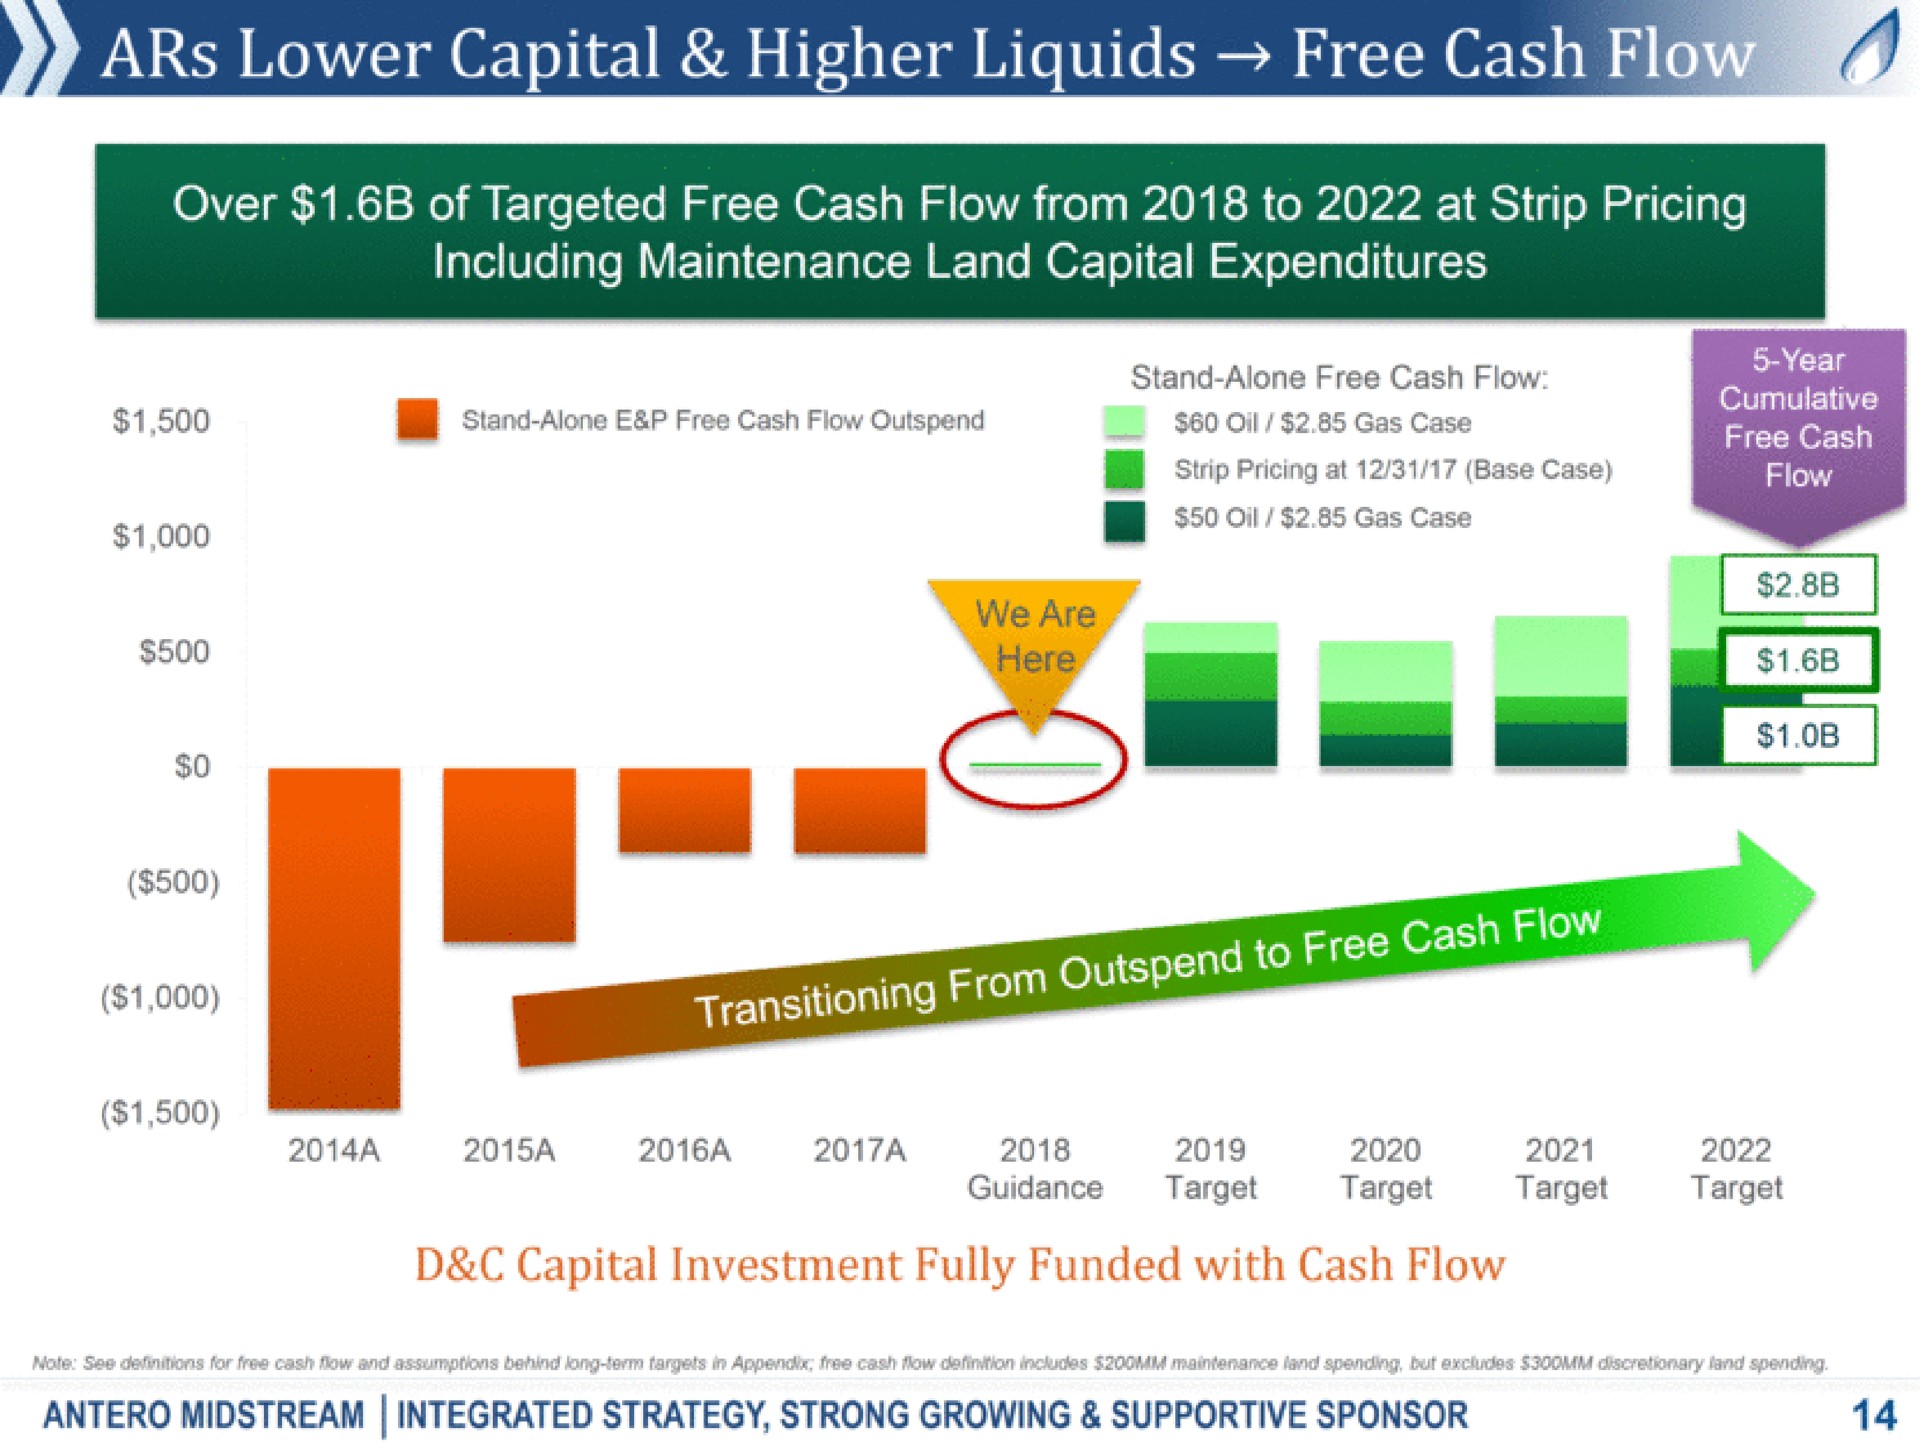 ars lower capital higher liquids free cash over of targeted free cash flow from to at strip pricing including maintenance land capital expenditures i stand alone free cash flow outspend oil gas case stand alone free cash flow strip pricing at base case gas case pin free cash flow a guidance target target target target capital investment fully funded with cash flow midstream min integrated strategy strong growing supportive sponsor | Antero Midstream Partners